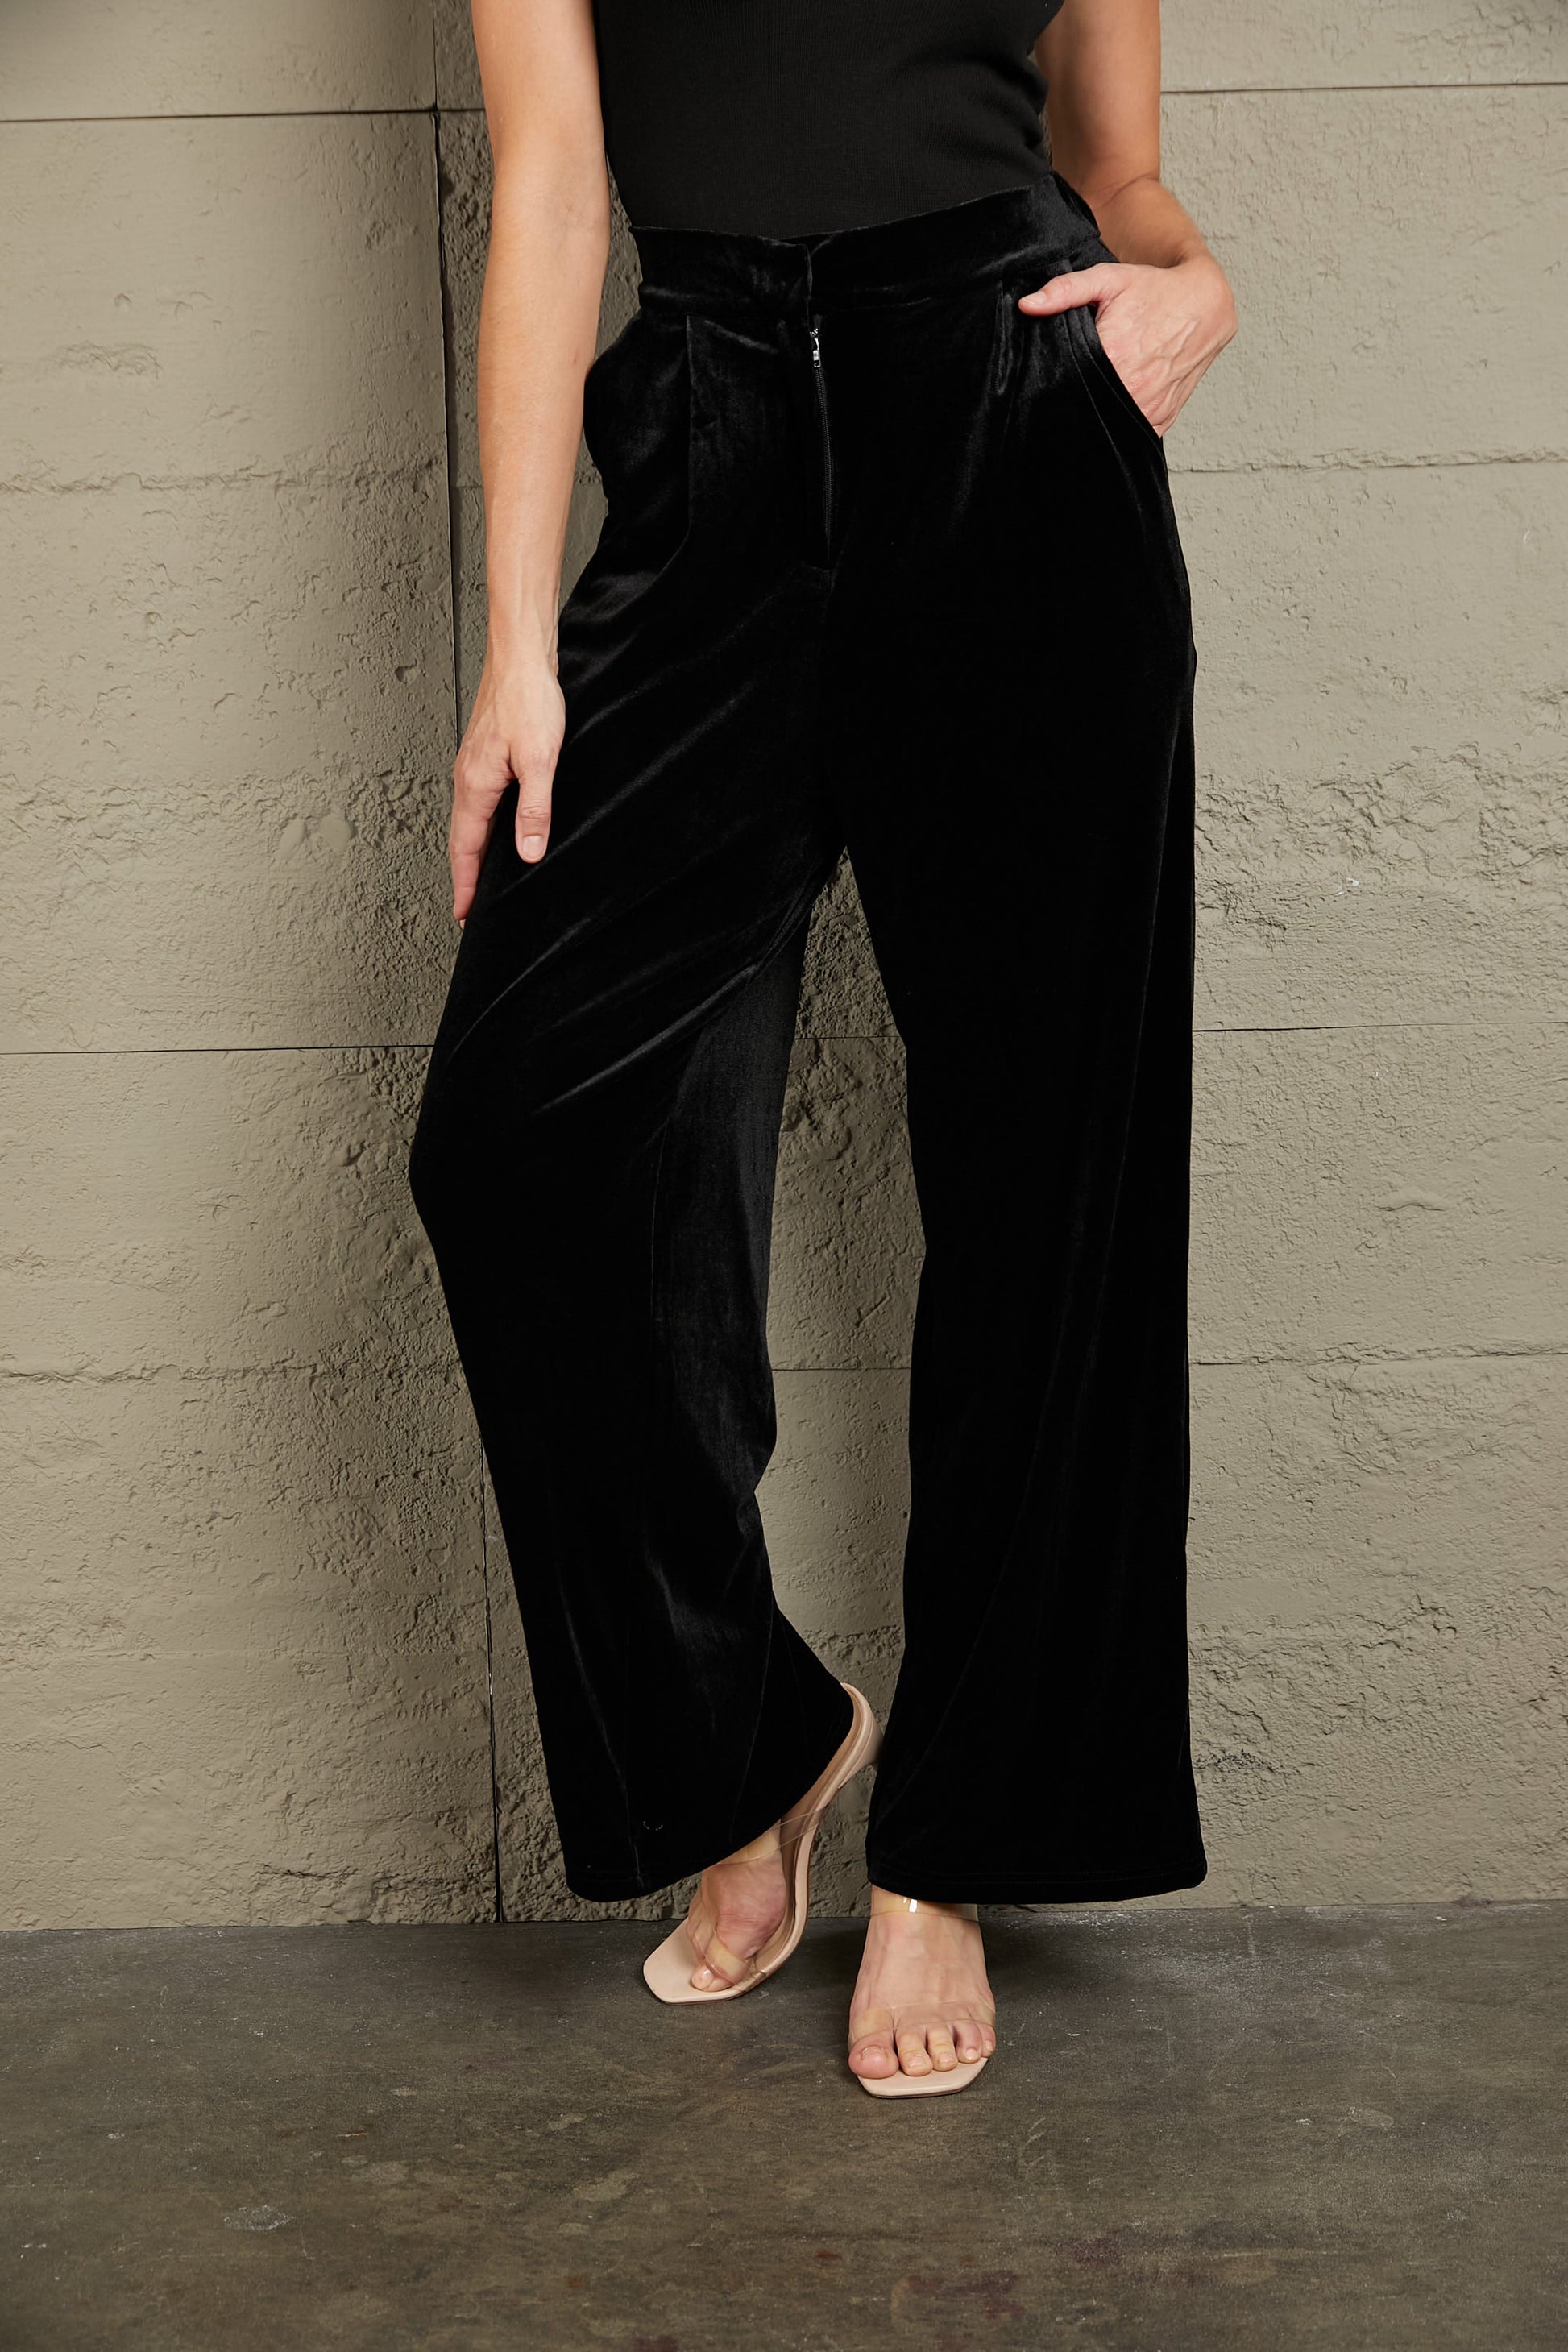 Loose Fit High Waist Long Pants with Pockets - Bottoms - Pants - 1 - 2024